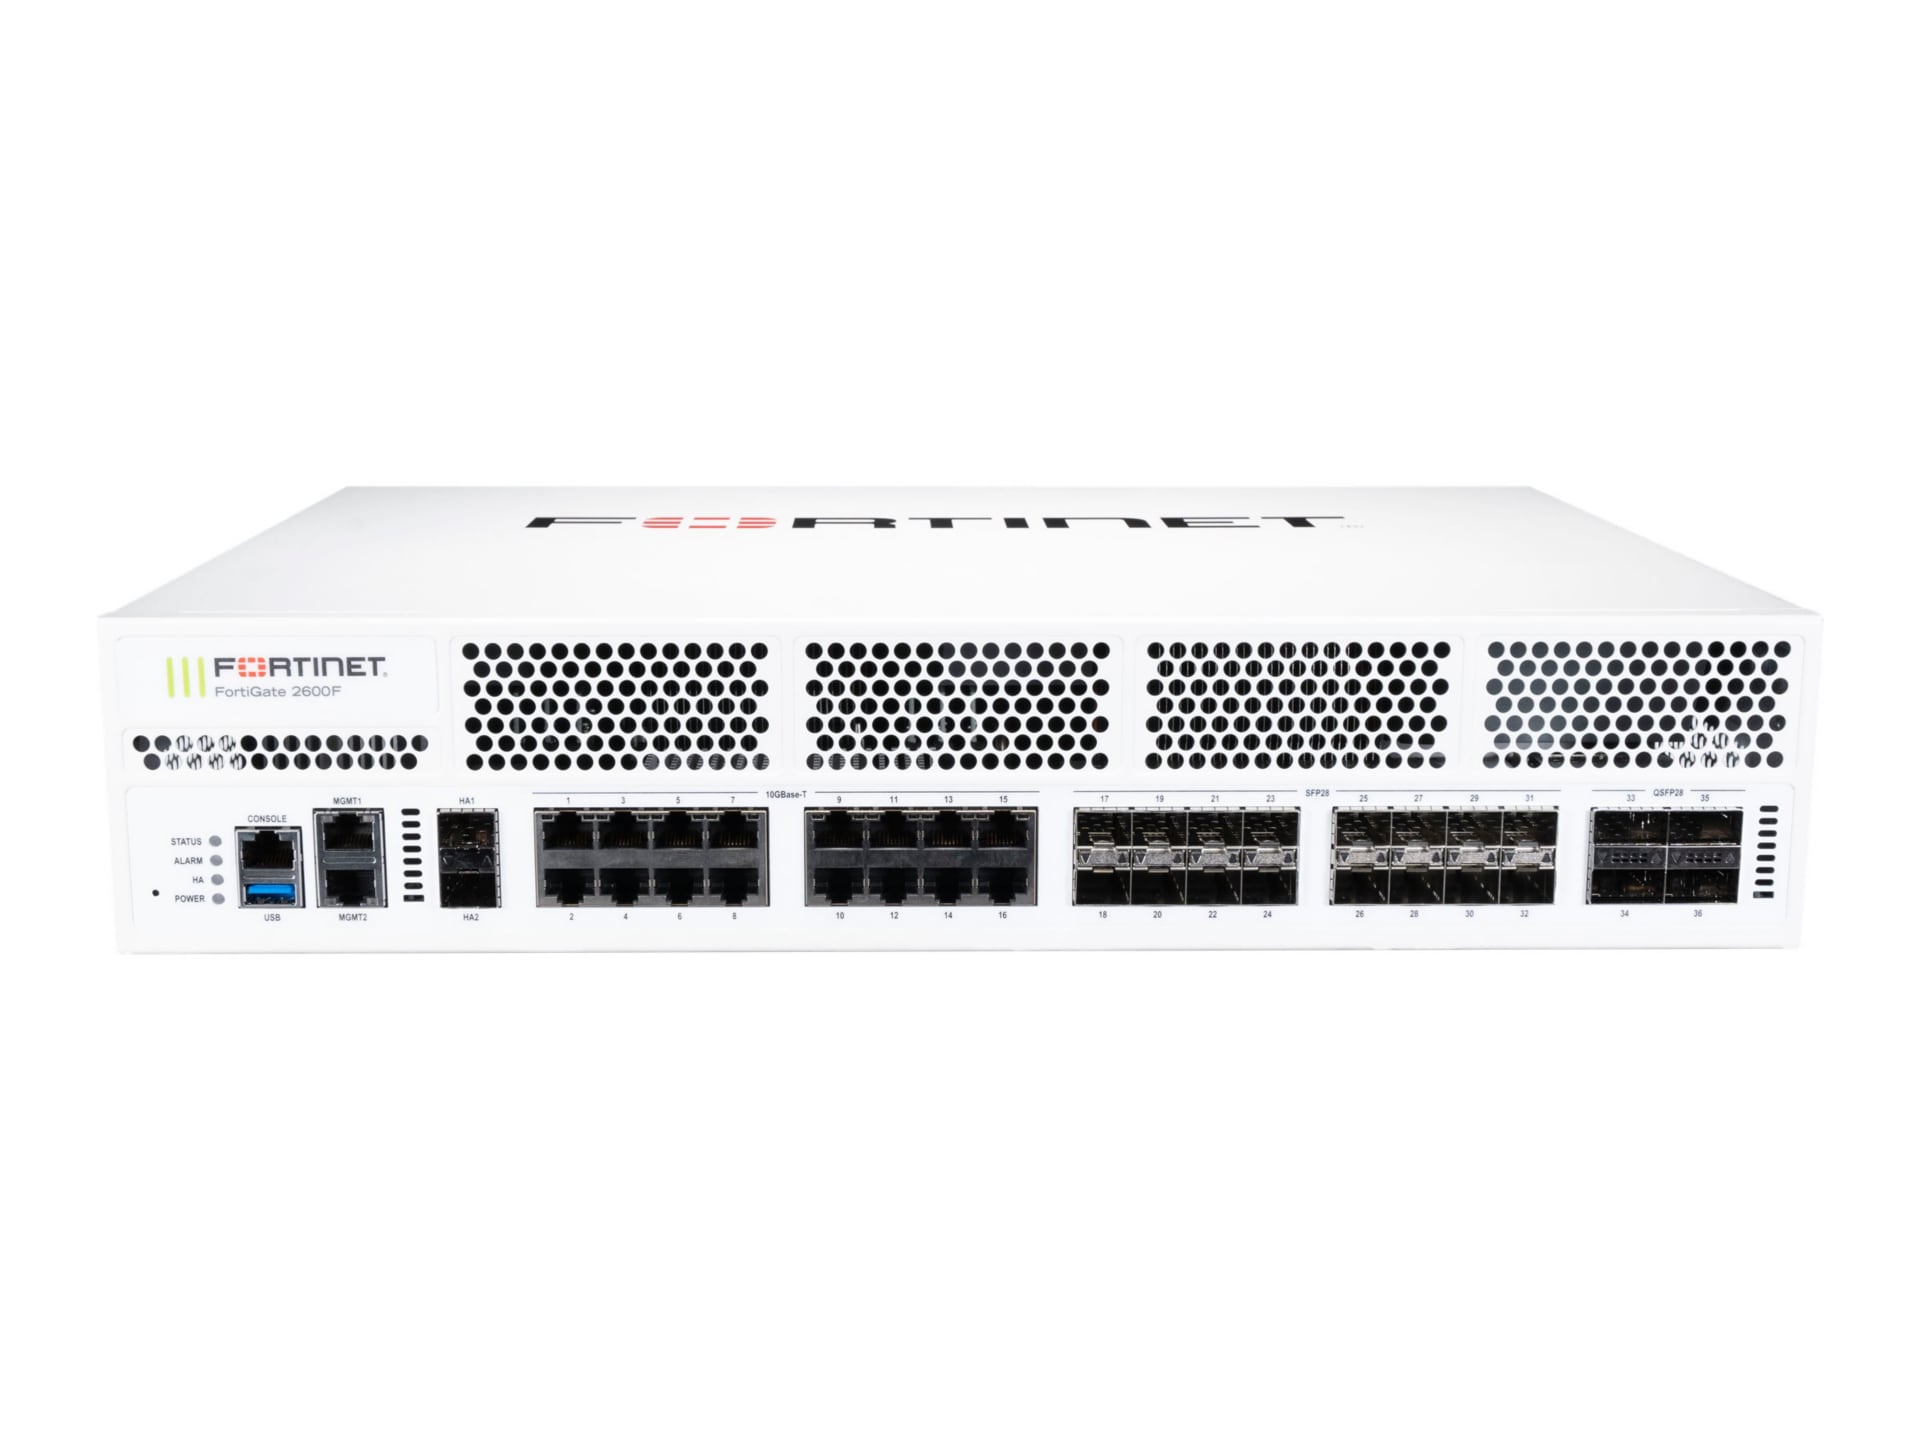 Fortinet FortiGate 2600F - security appliance - with 5 years 24x7 FortiCare and FortiGuard Unified (UTM) Protection